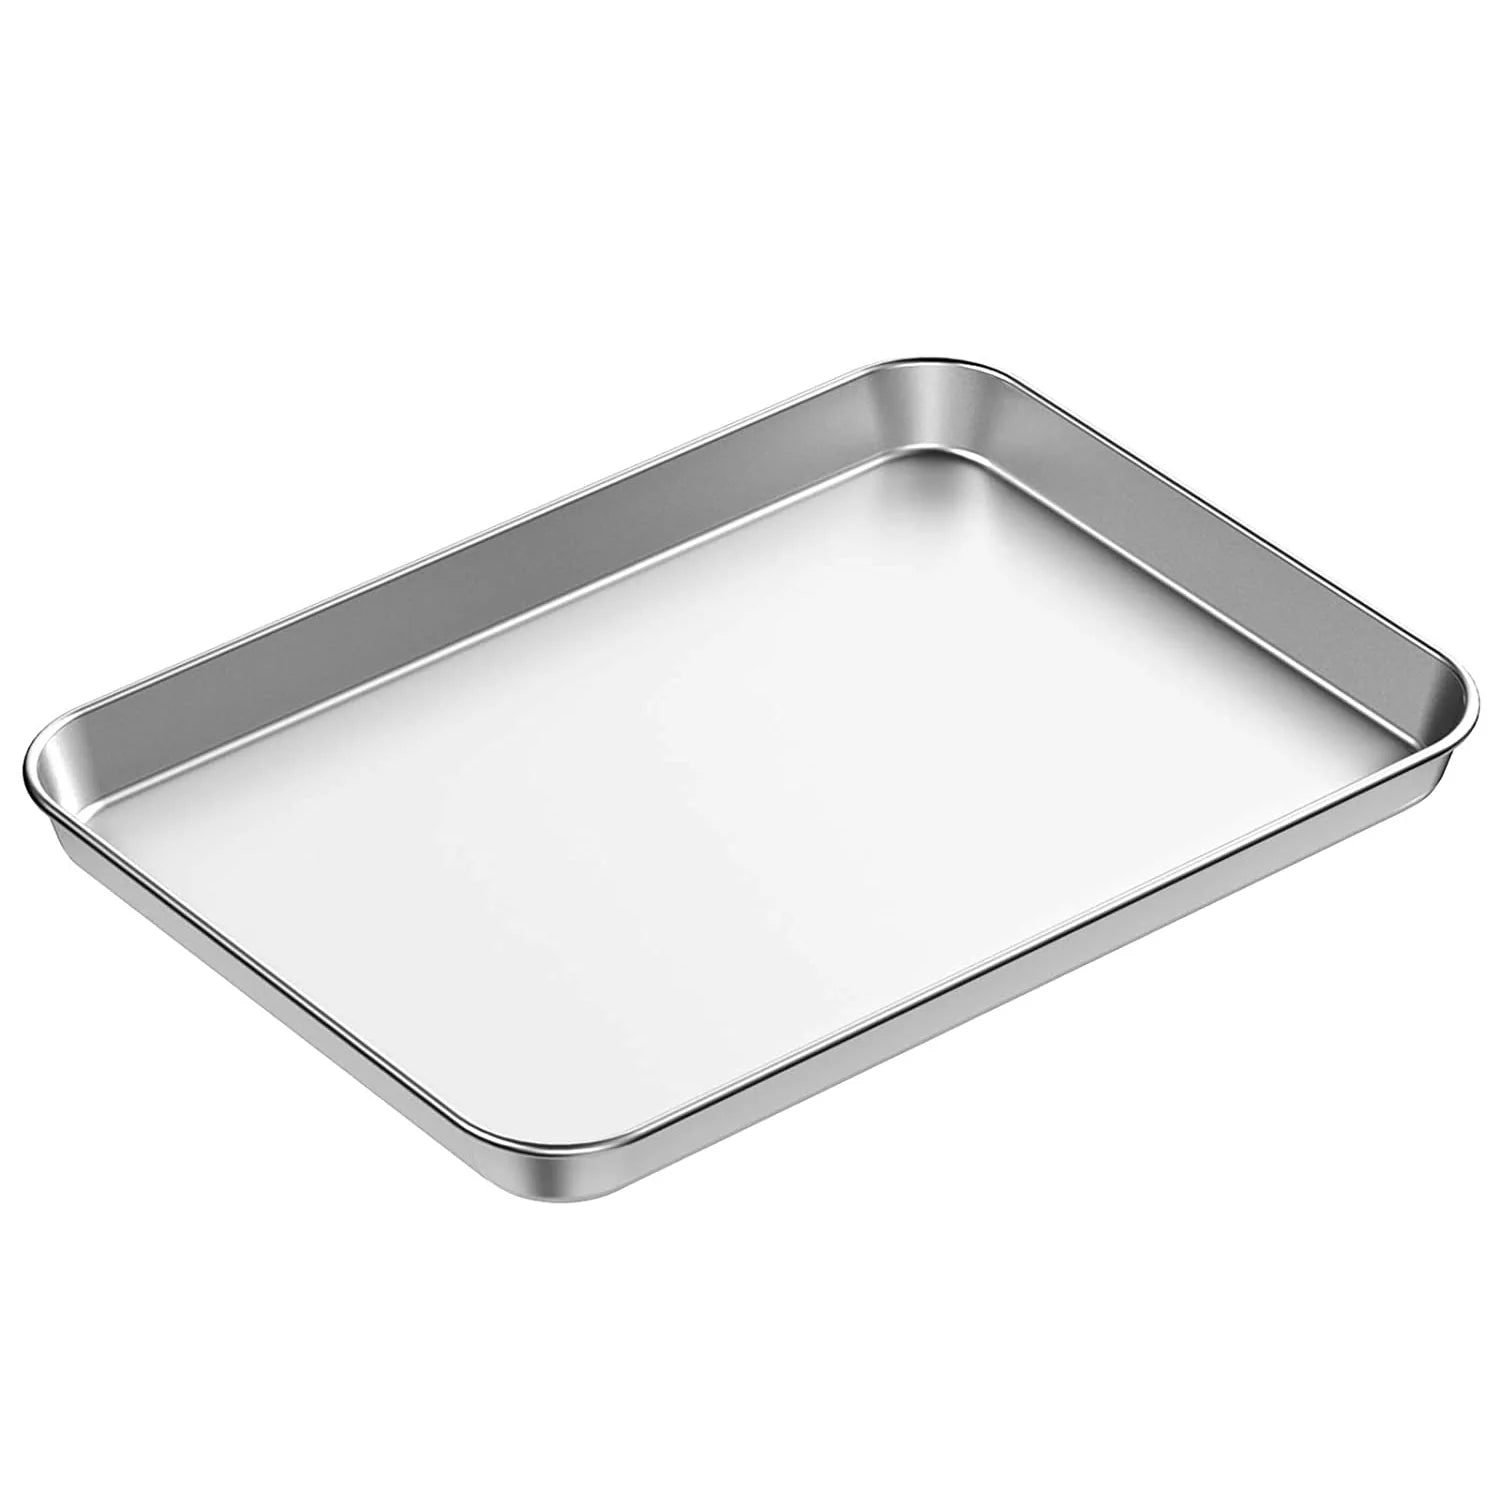 Set Of 2 Baking Trays, Rectangle Baking Pan, Stainless Steel Oven Tray